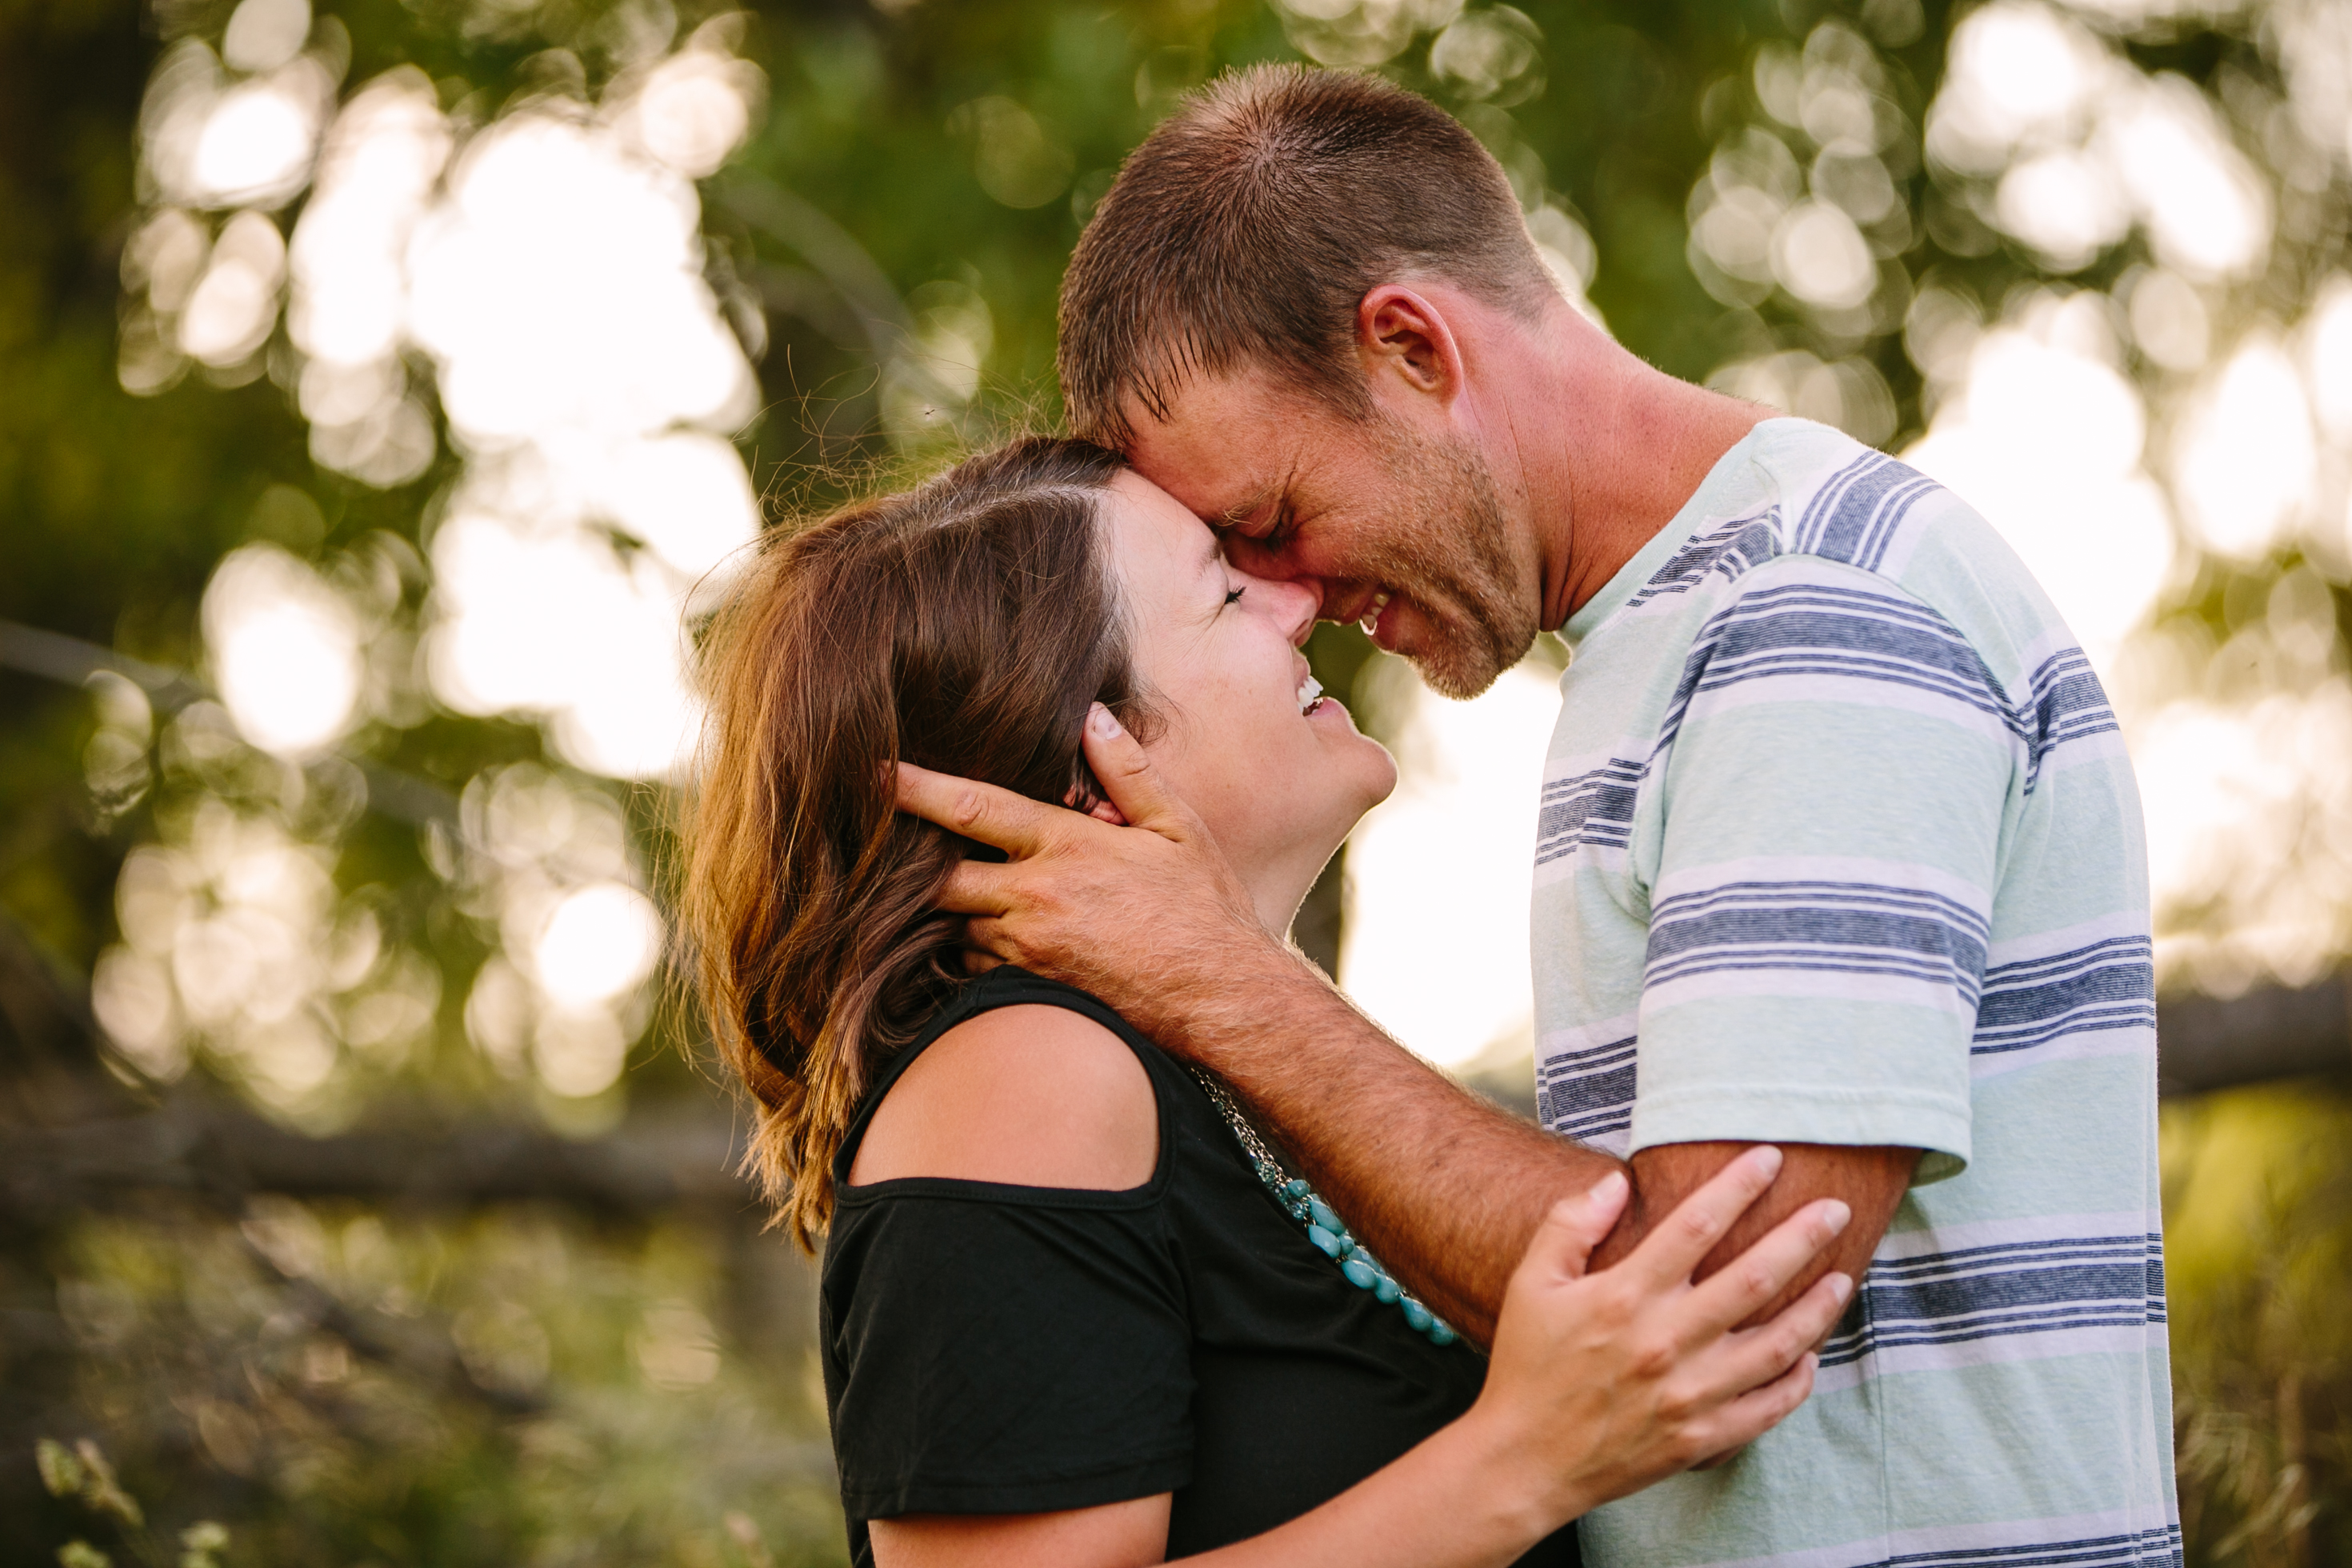 outdoor dubuque engagement session by catherine furlin photography, couple laughing